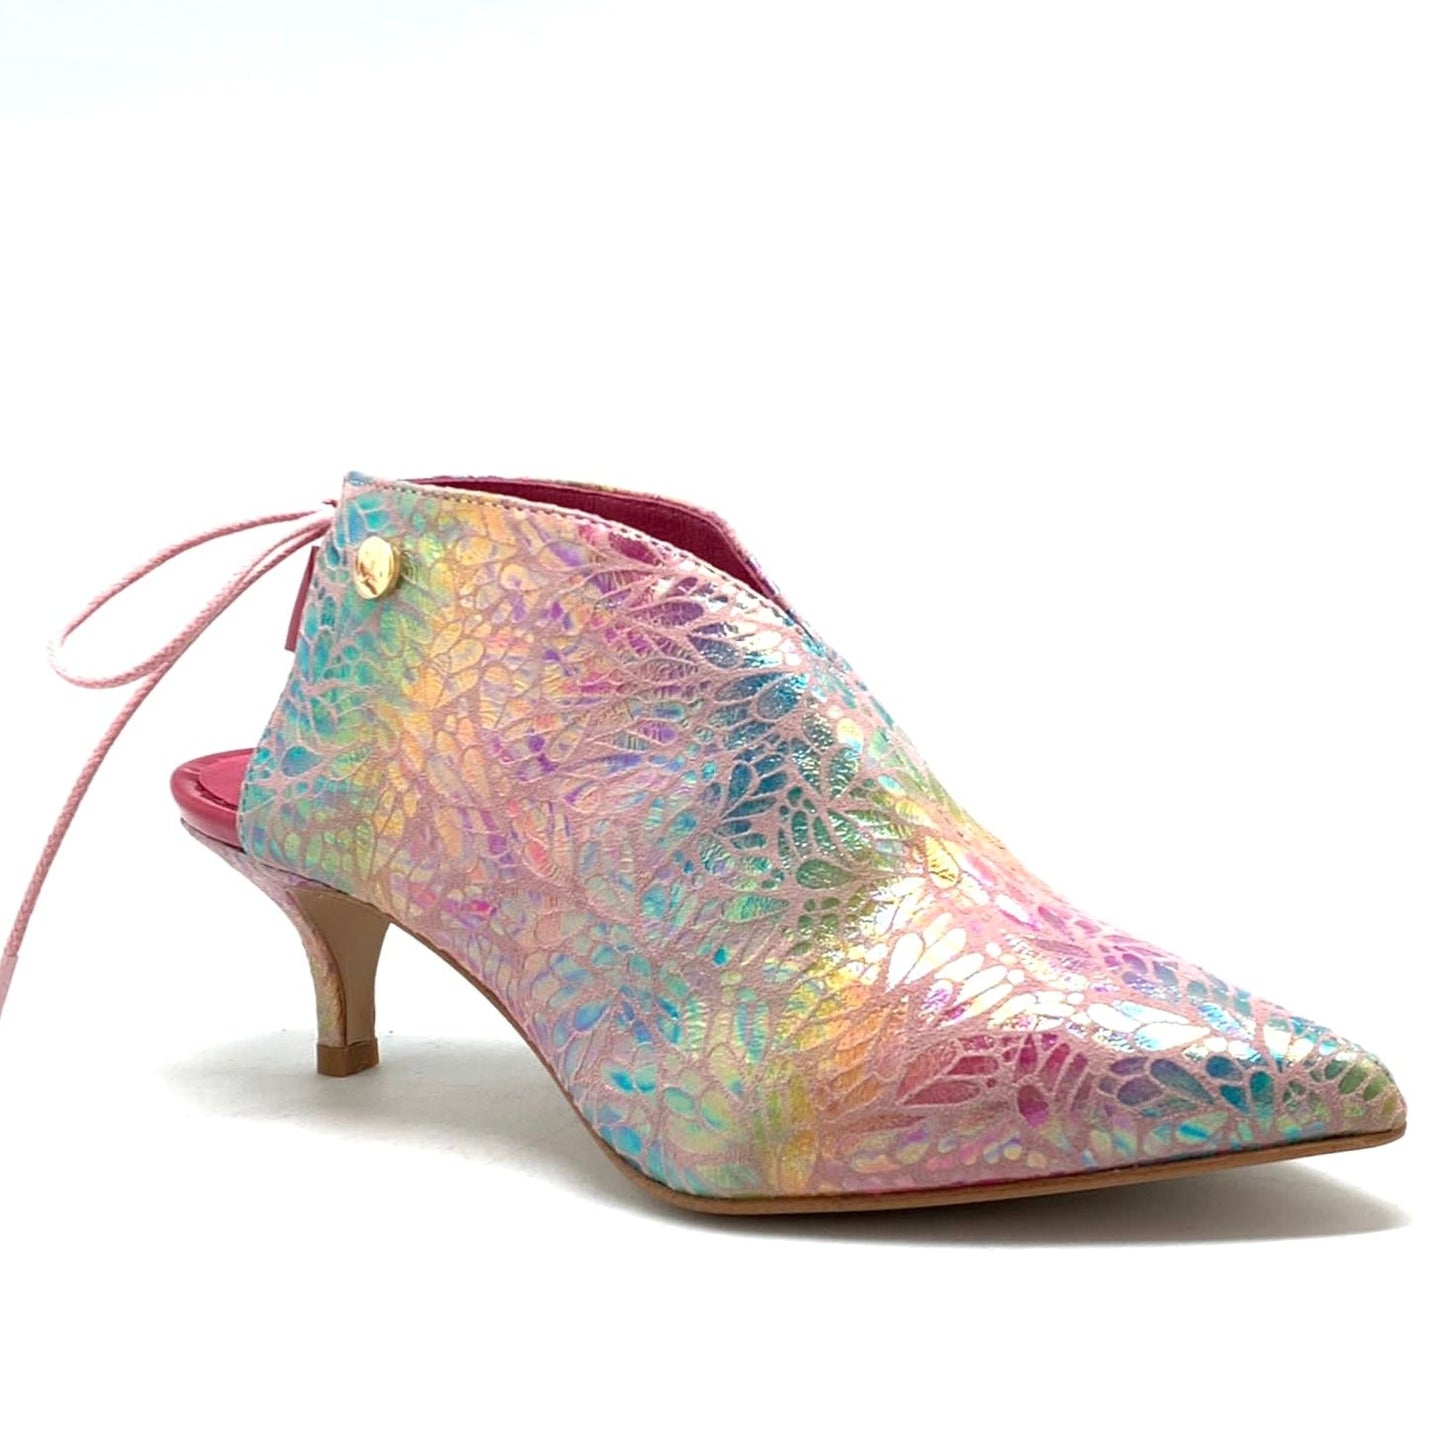 Sliver -baby pink iridescent closed toe mule